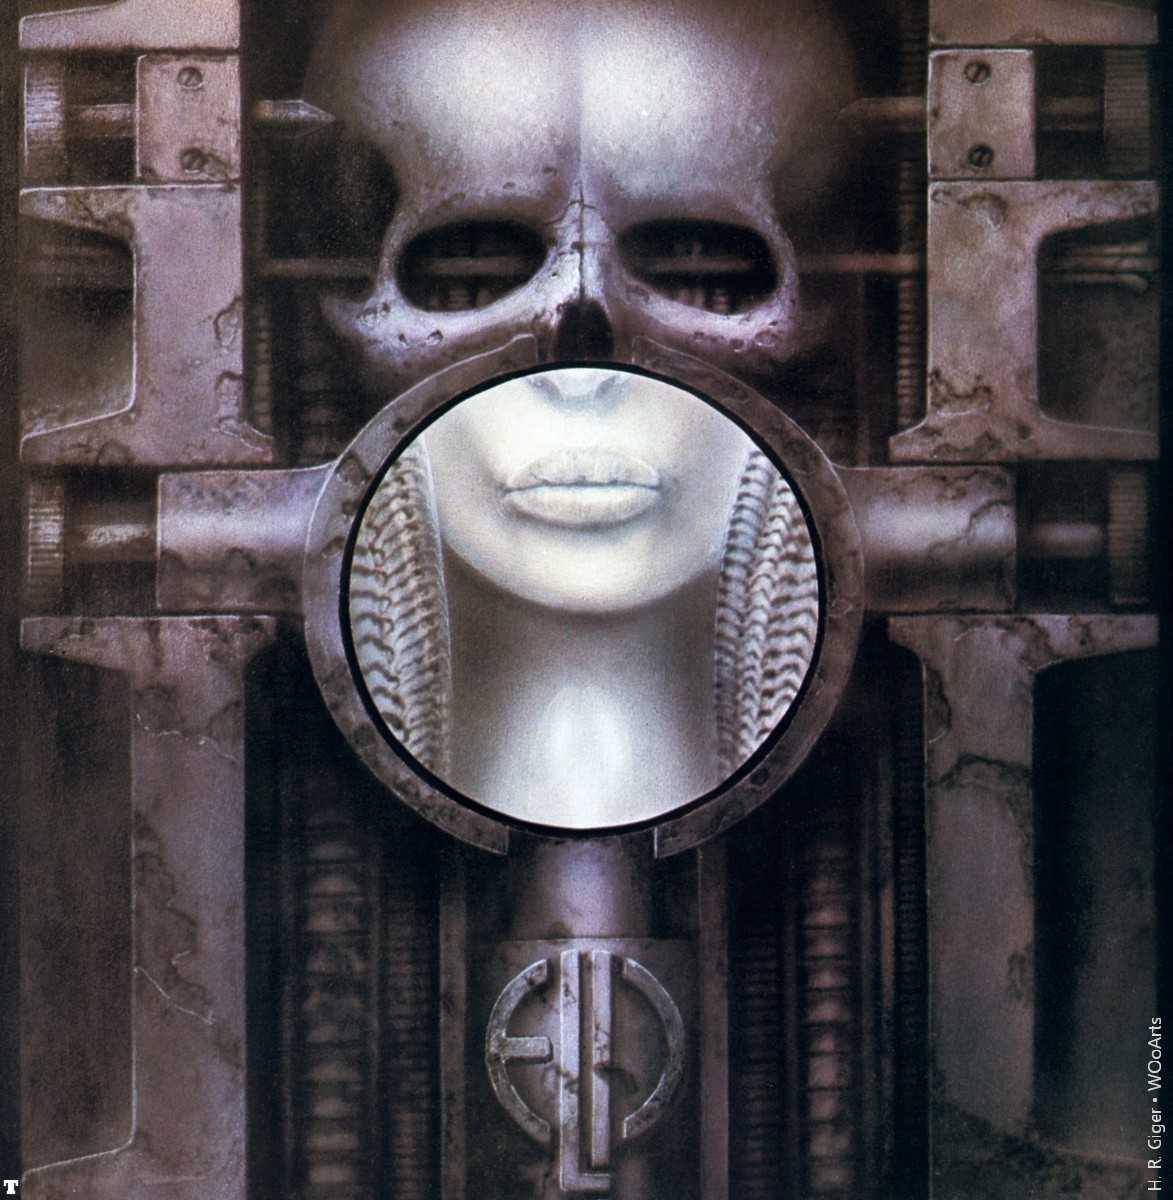 Painting by H. R. Giger